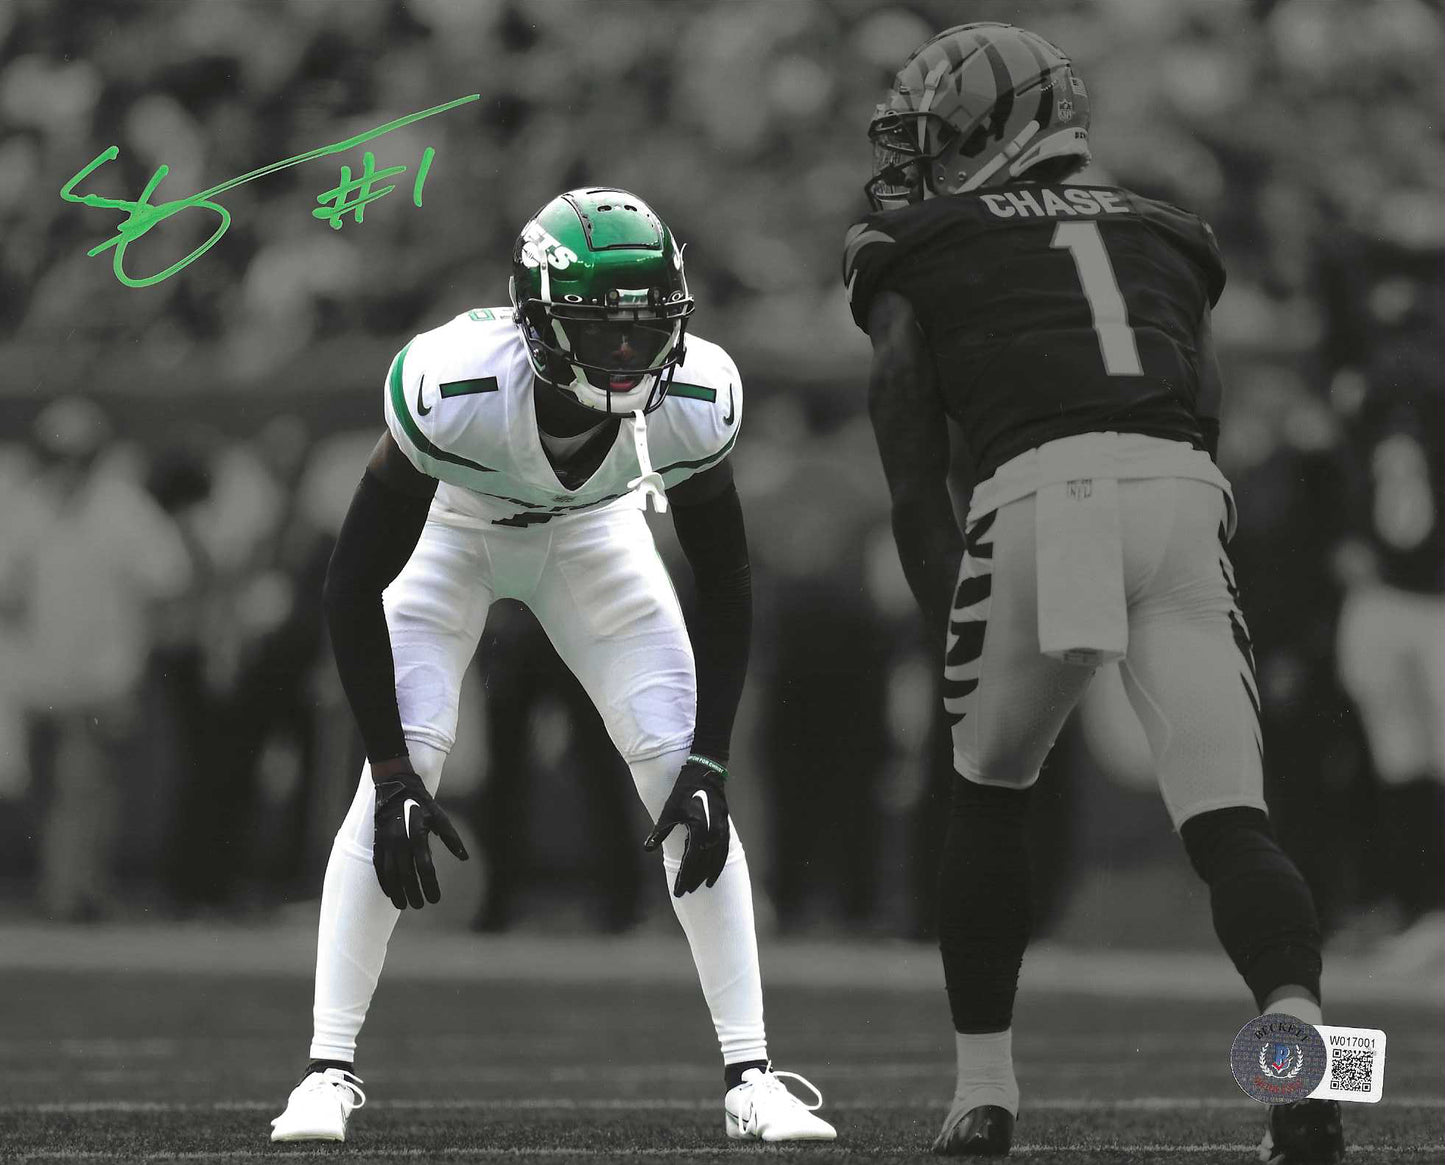 New York Jets Sauce Gardner Spotlight Photo Autographed In Jets Green Paint Pen 8x10 Photo Picture